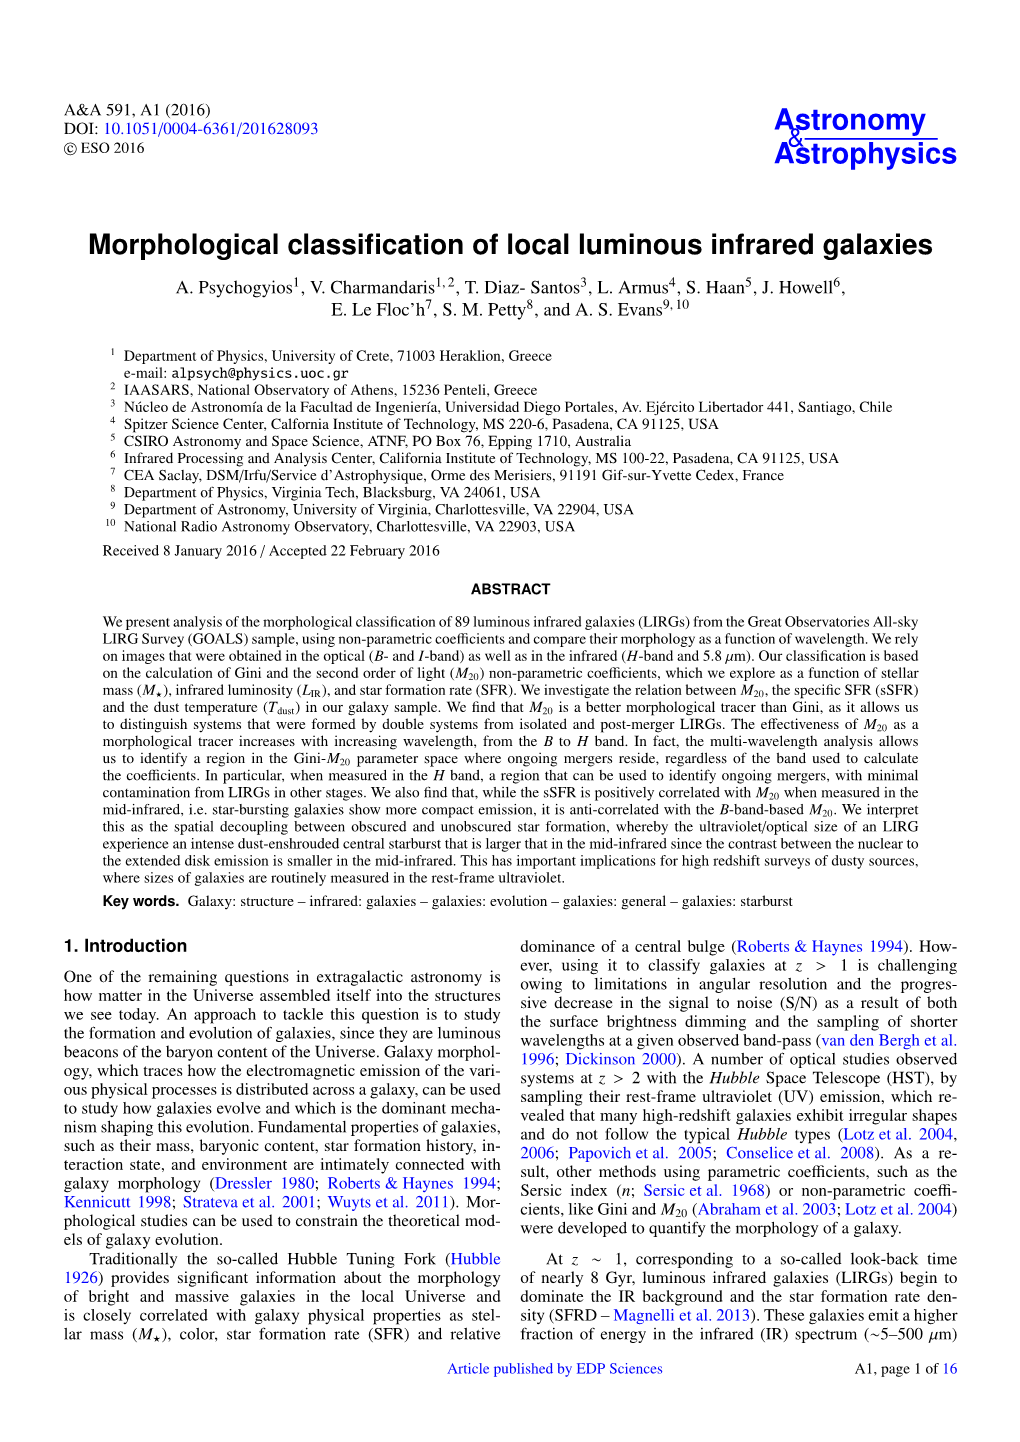 Morphological Classification of Local Luminous Infrared Galaxies